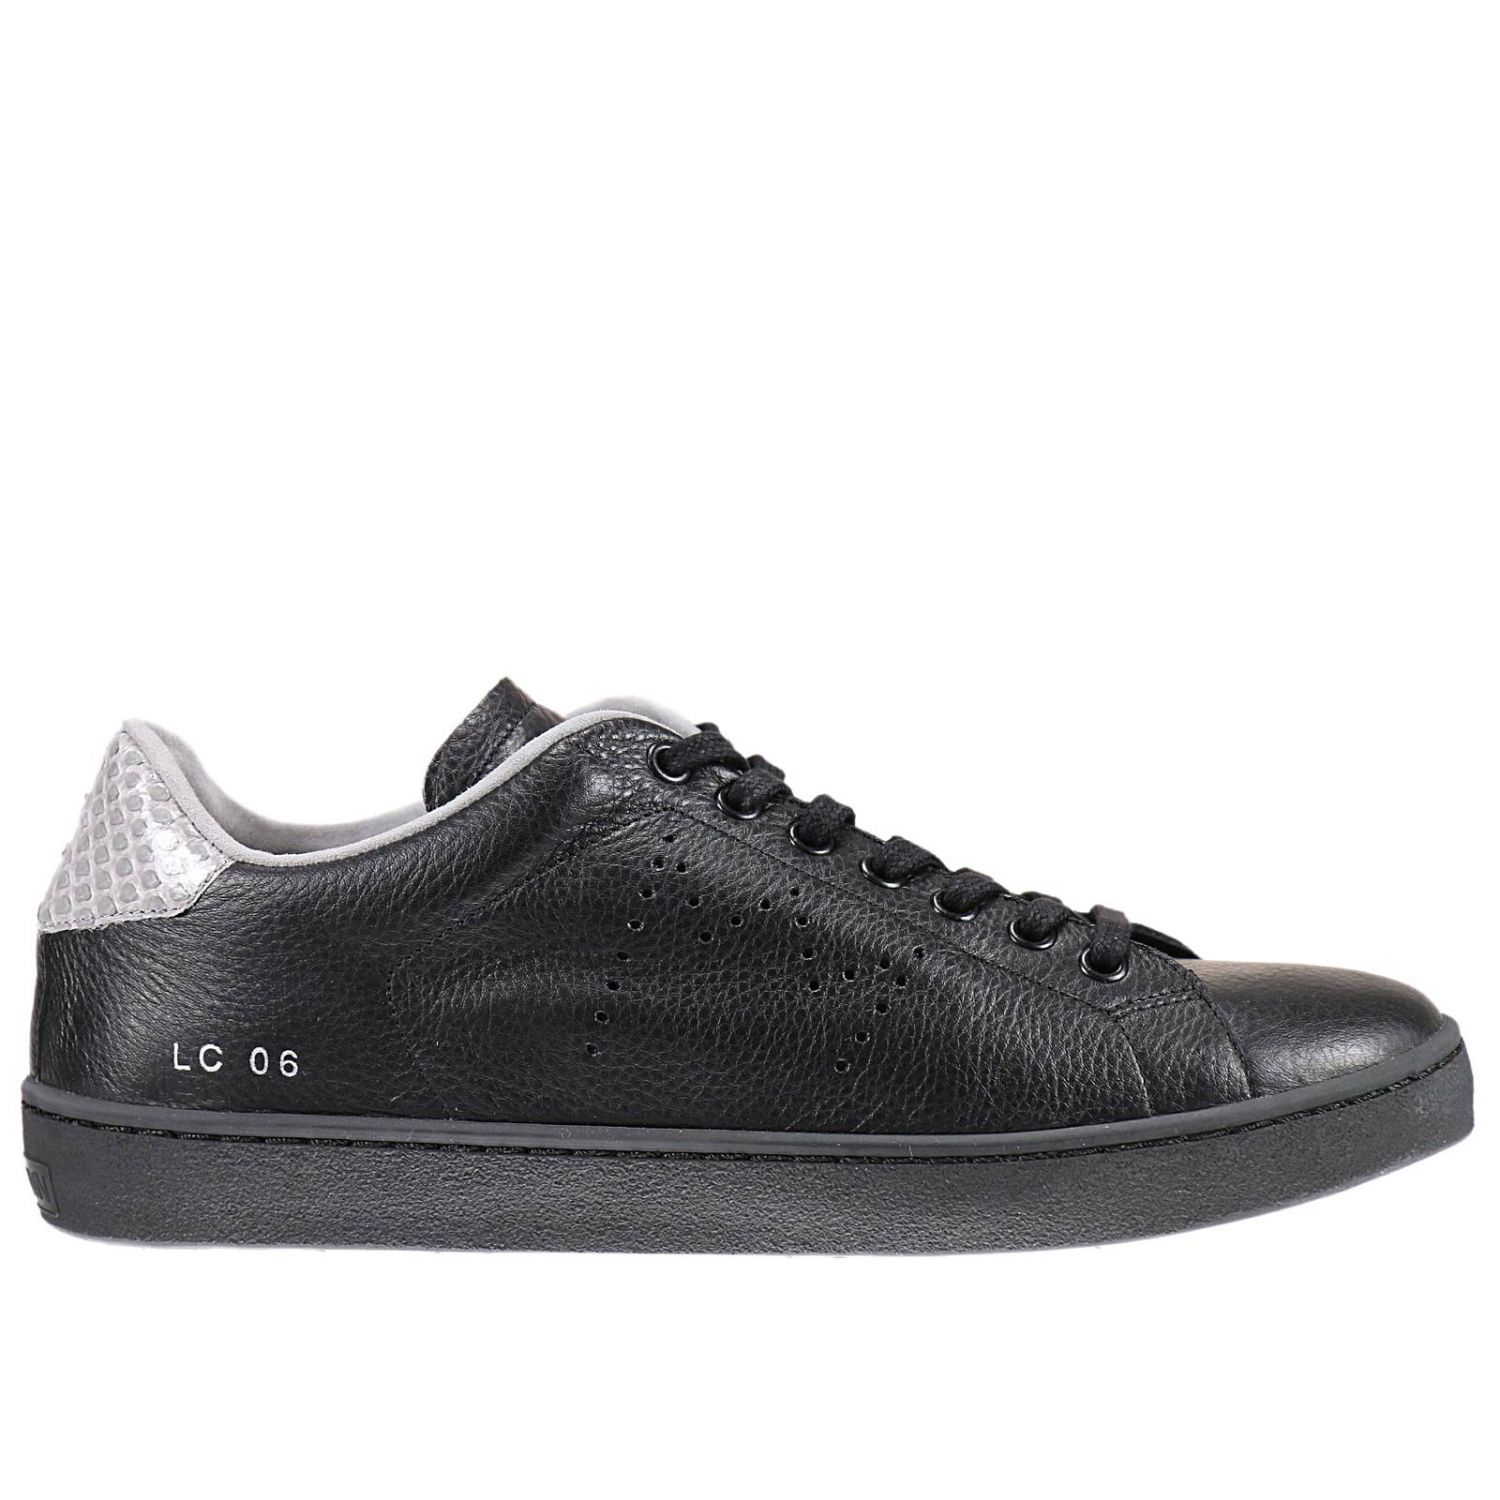 Leather Crown Outlet: Shoes man | Sneakers Leather Crown Men Black ...